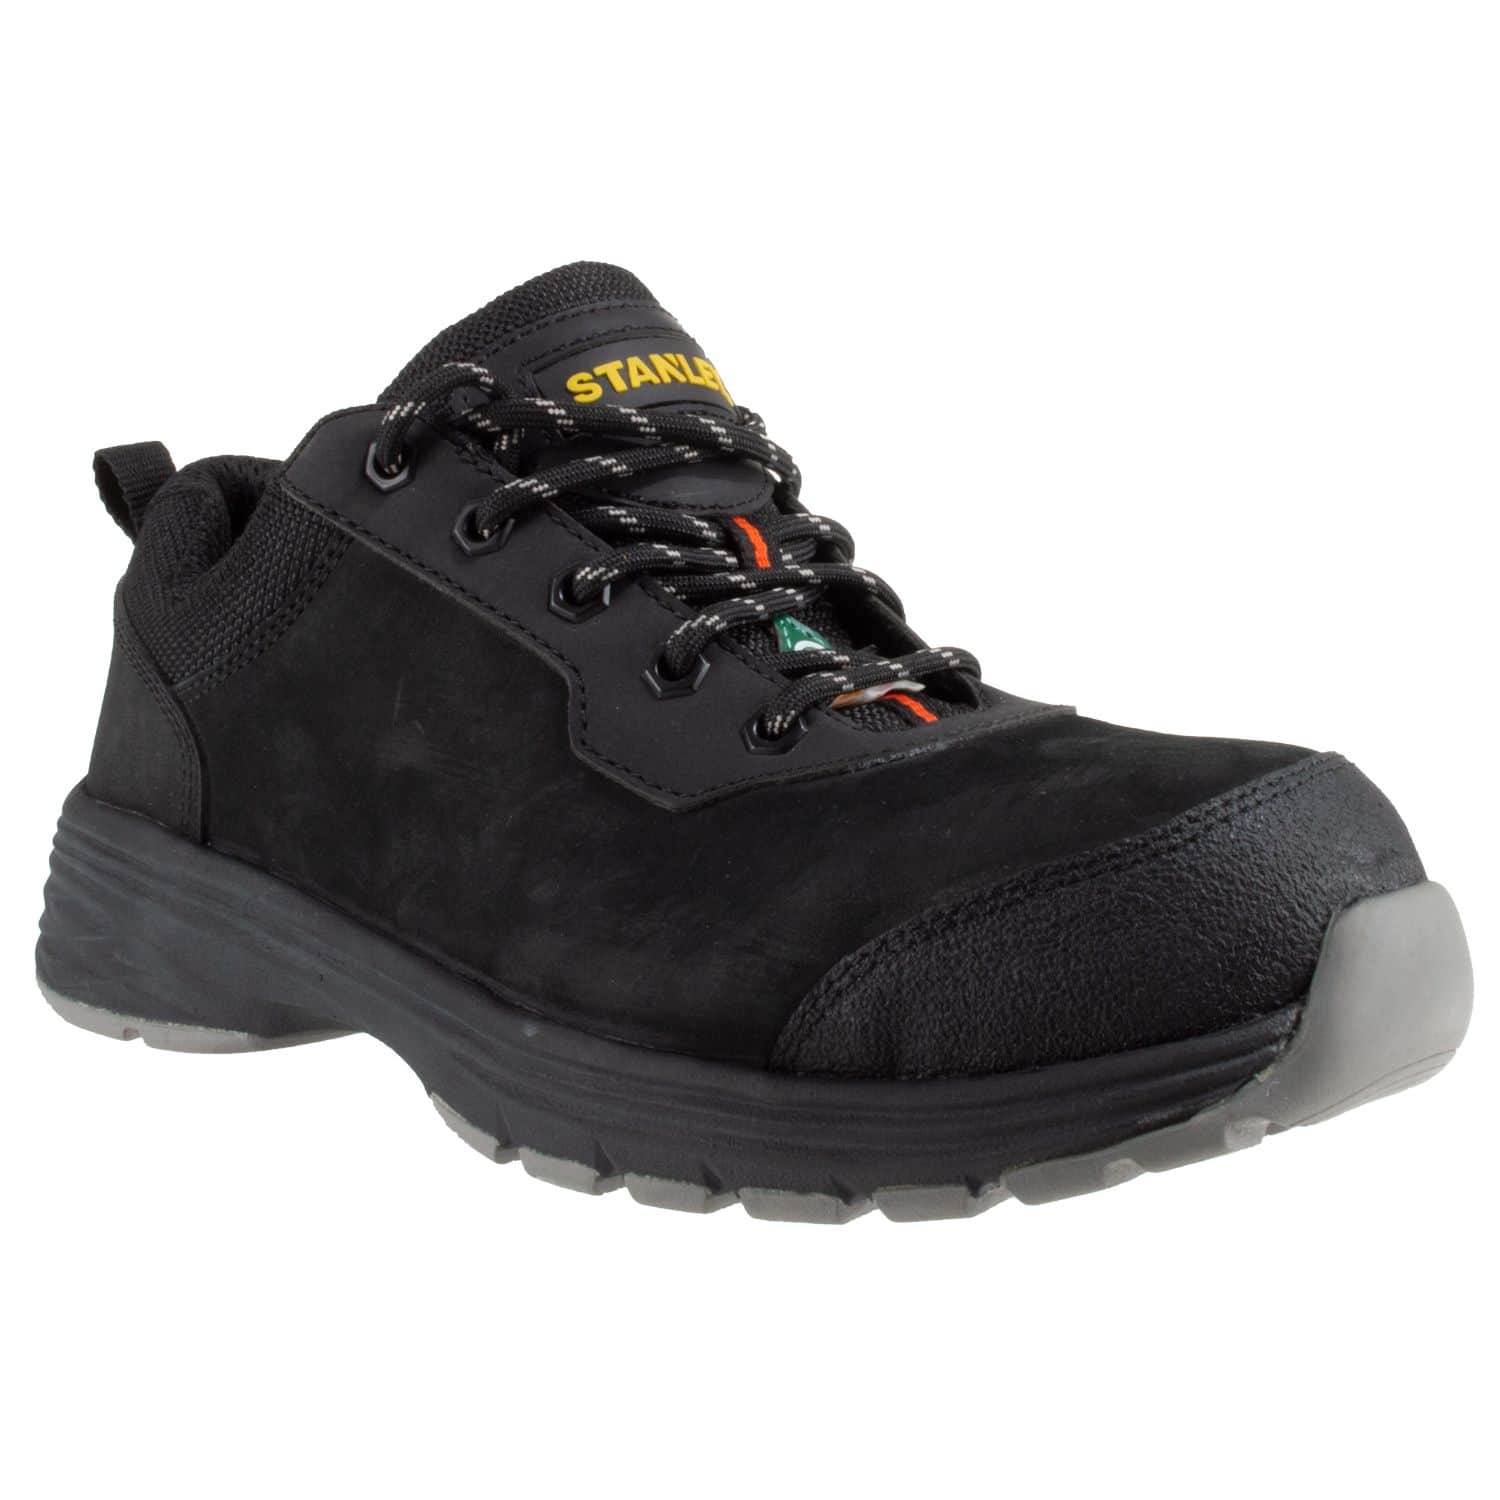 Stanley Zeiss Men's CSA Steel Toe Oxford Shoes, Comfortable Cushioned ...